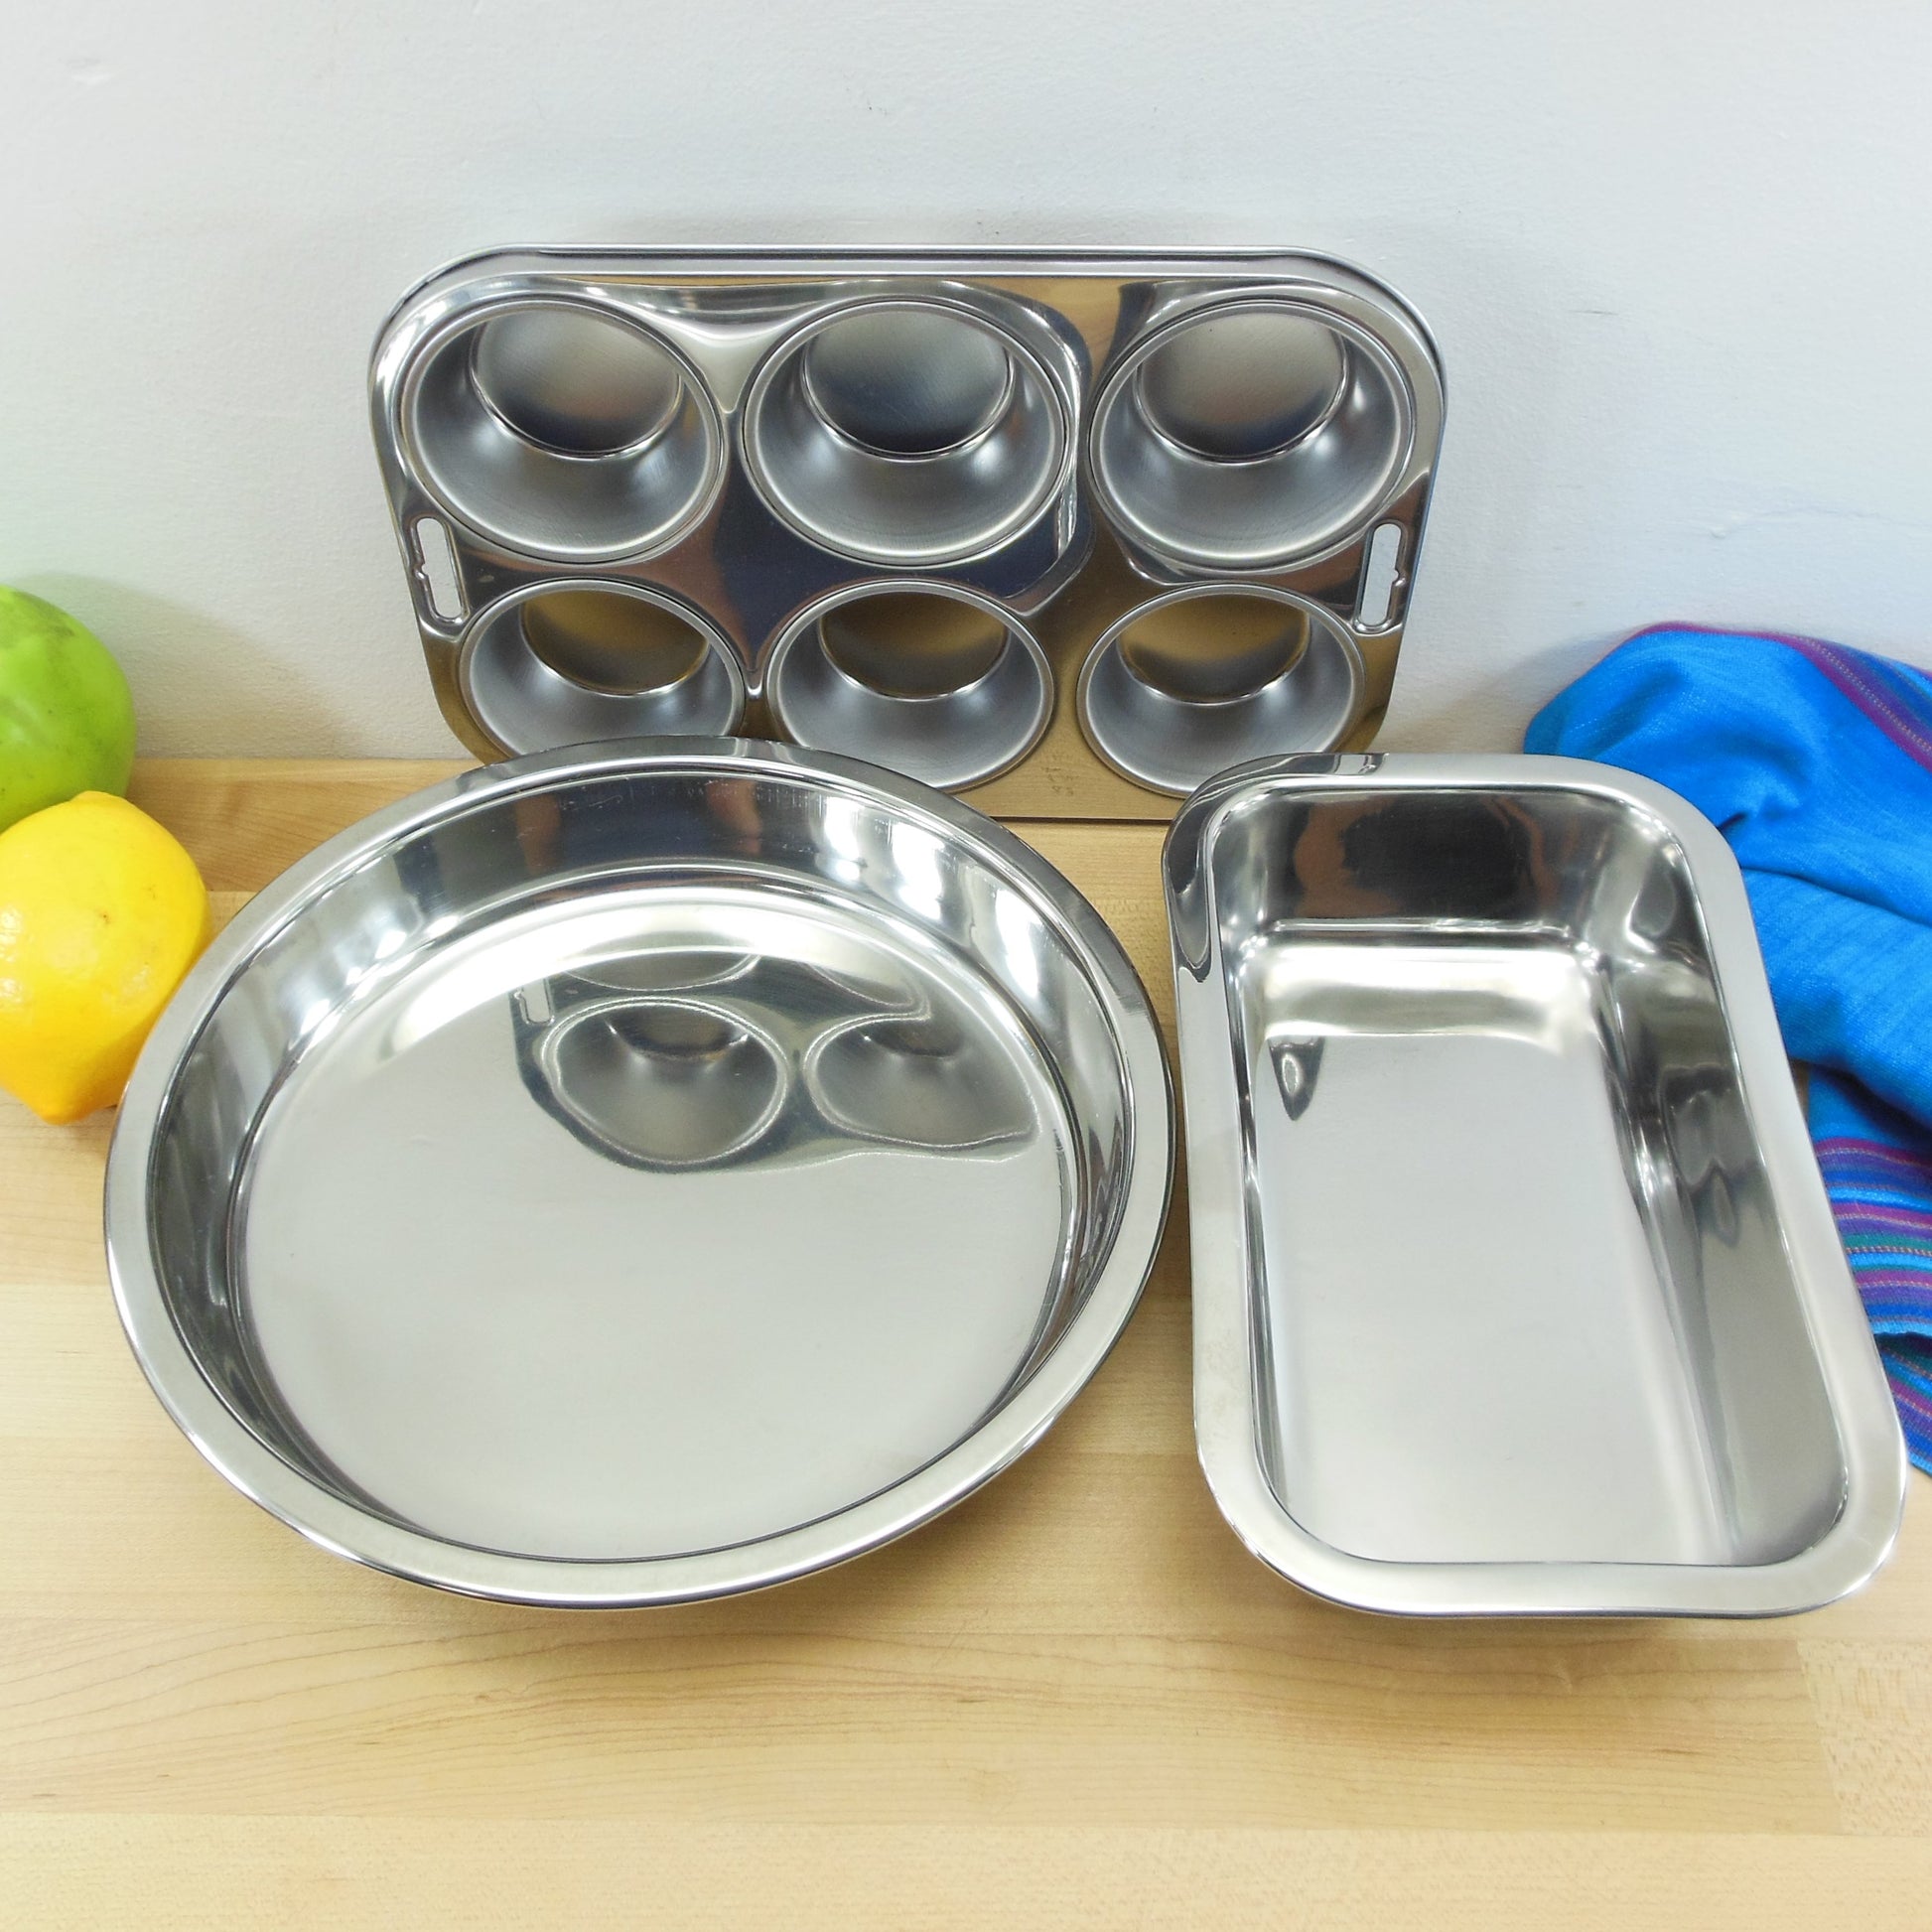 Mirror Stainless Steel Unbranded Trio Cake/Pie, Loaf & Muffin Pans